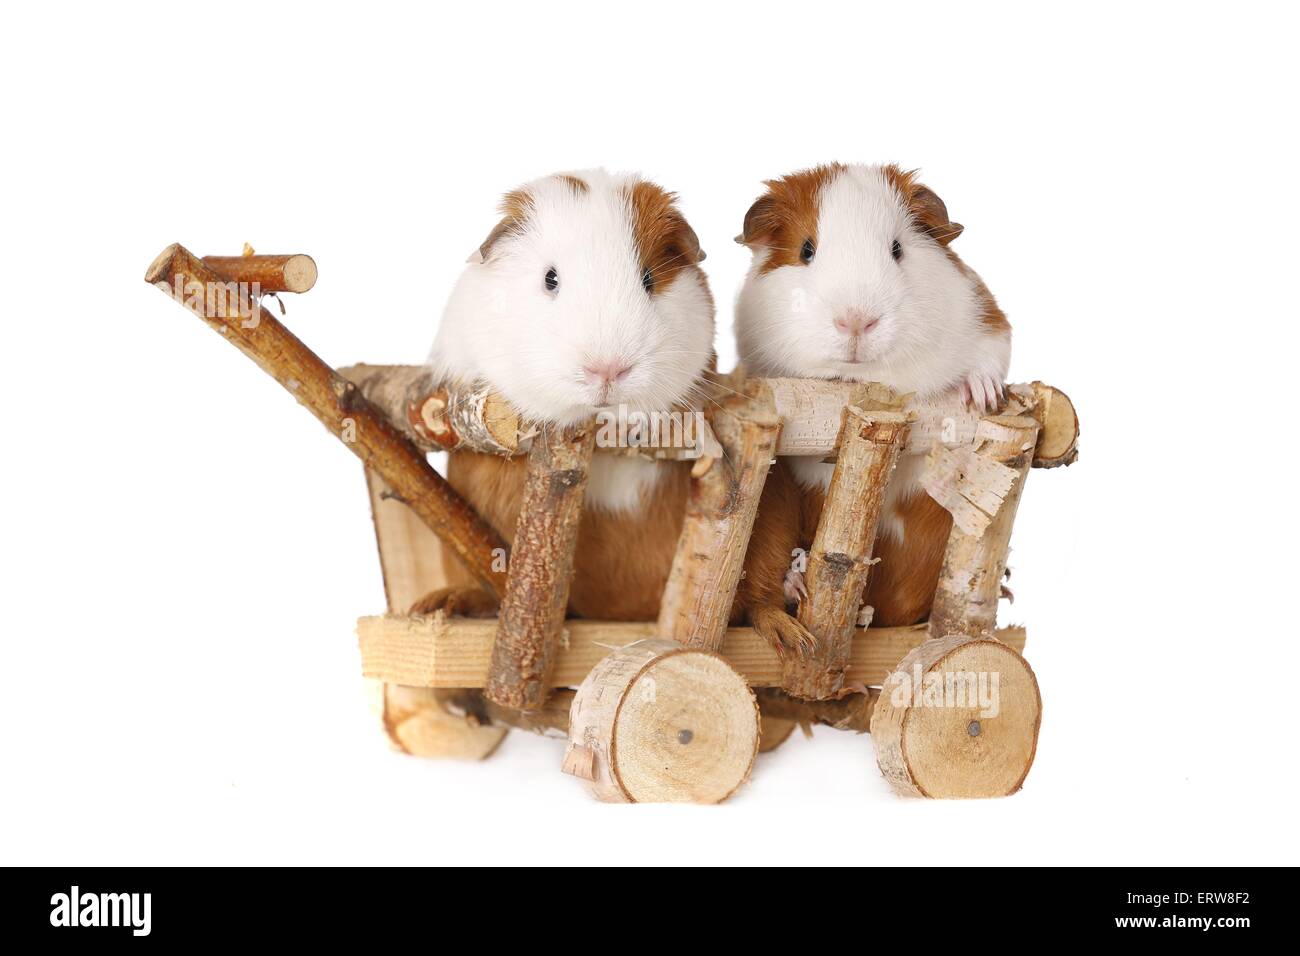 smooth-haired guinea pig Stock Photo